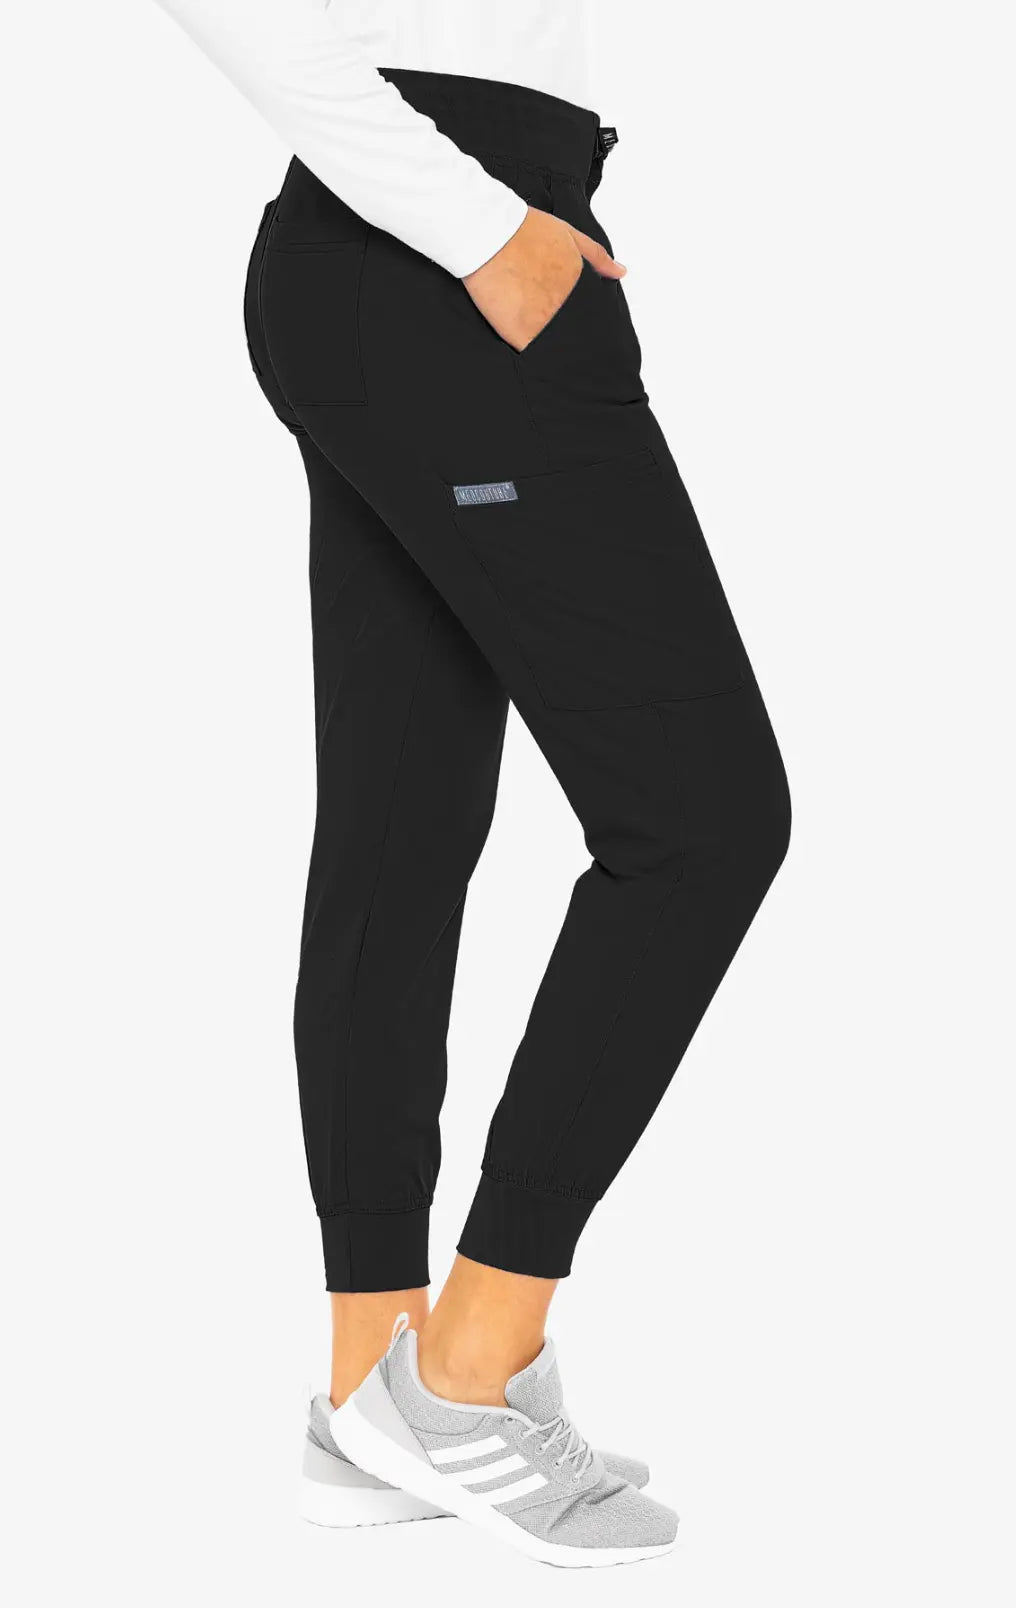 Petite Maternity Jogger Pants By Med Couture - Scrub Depot